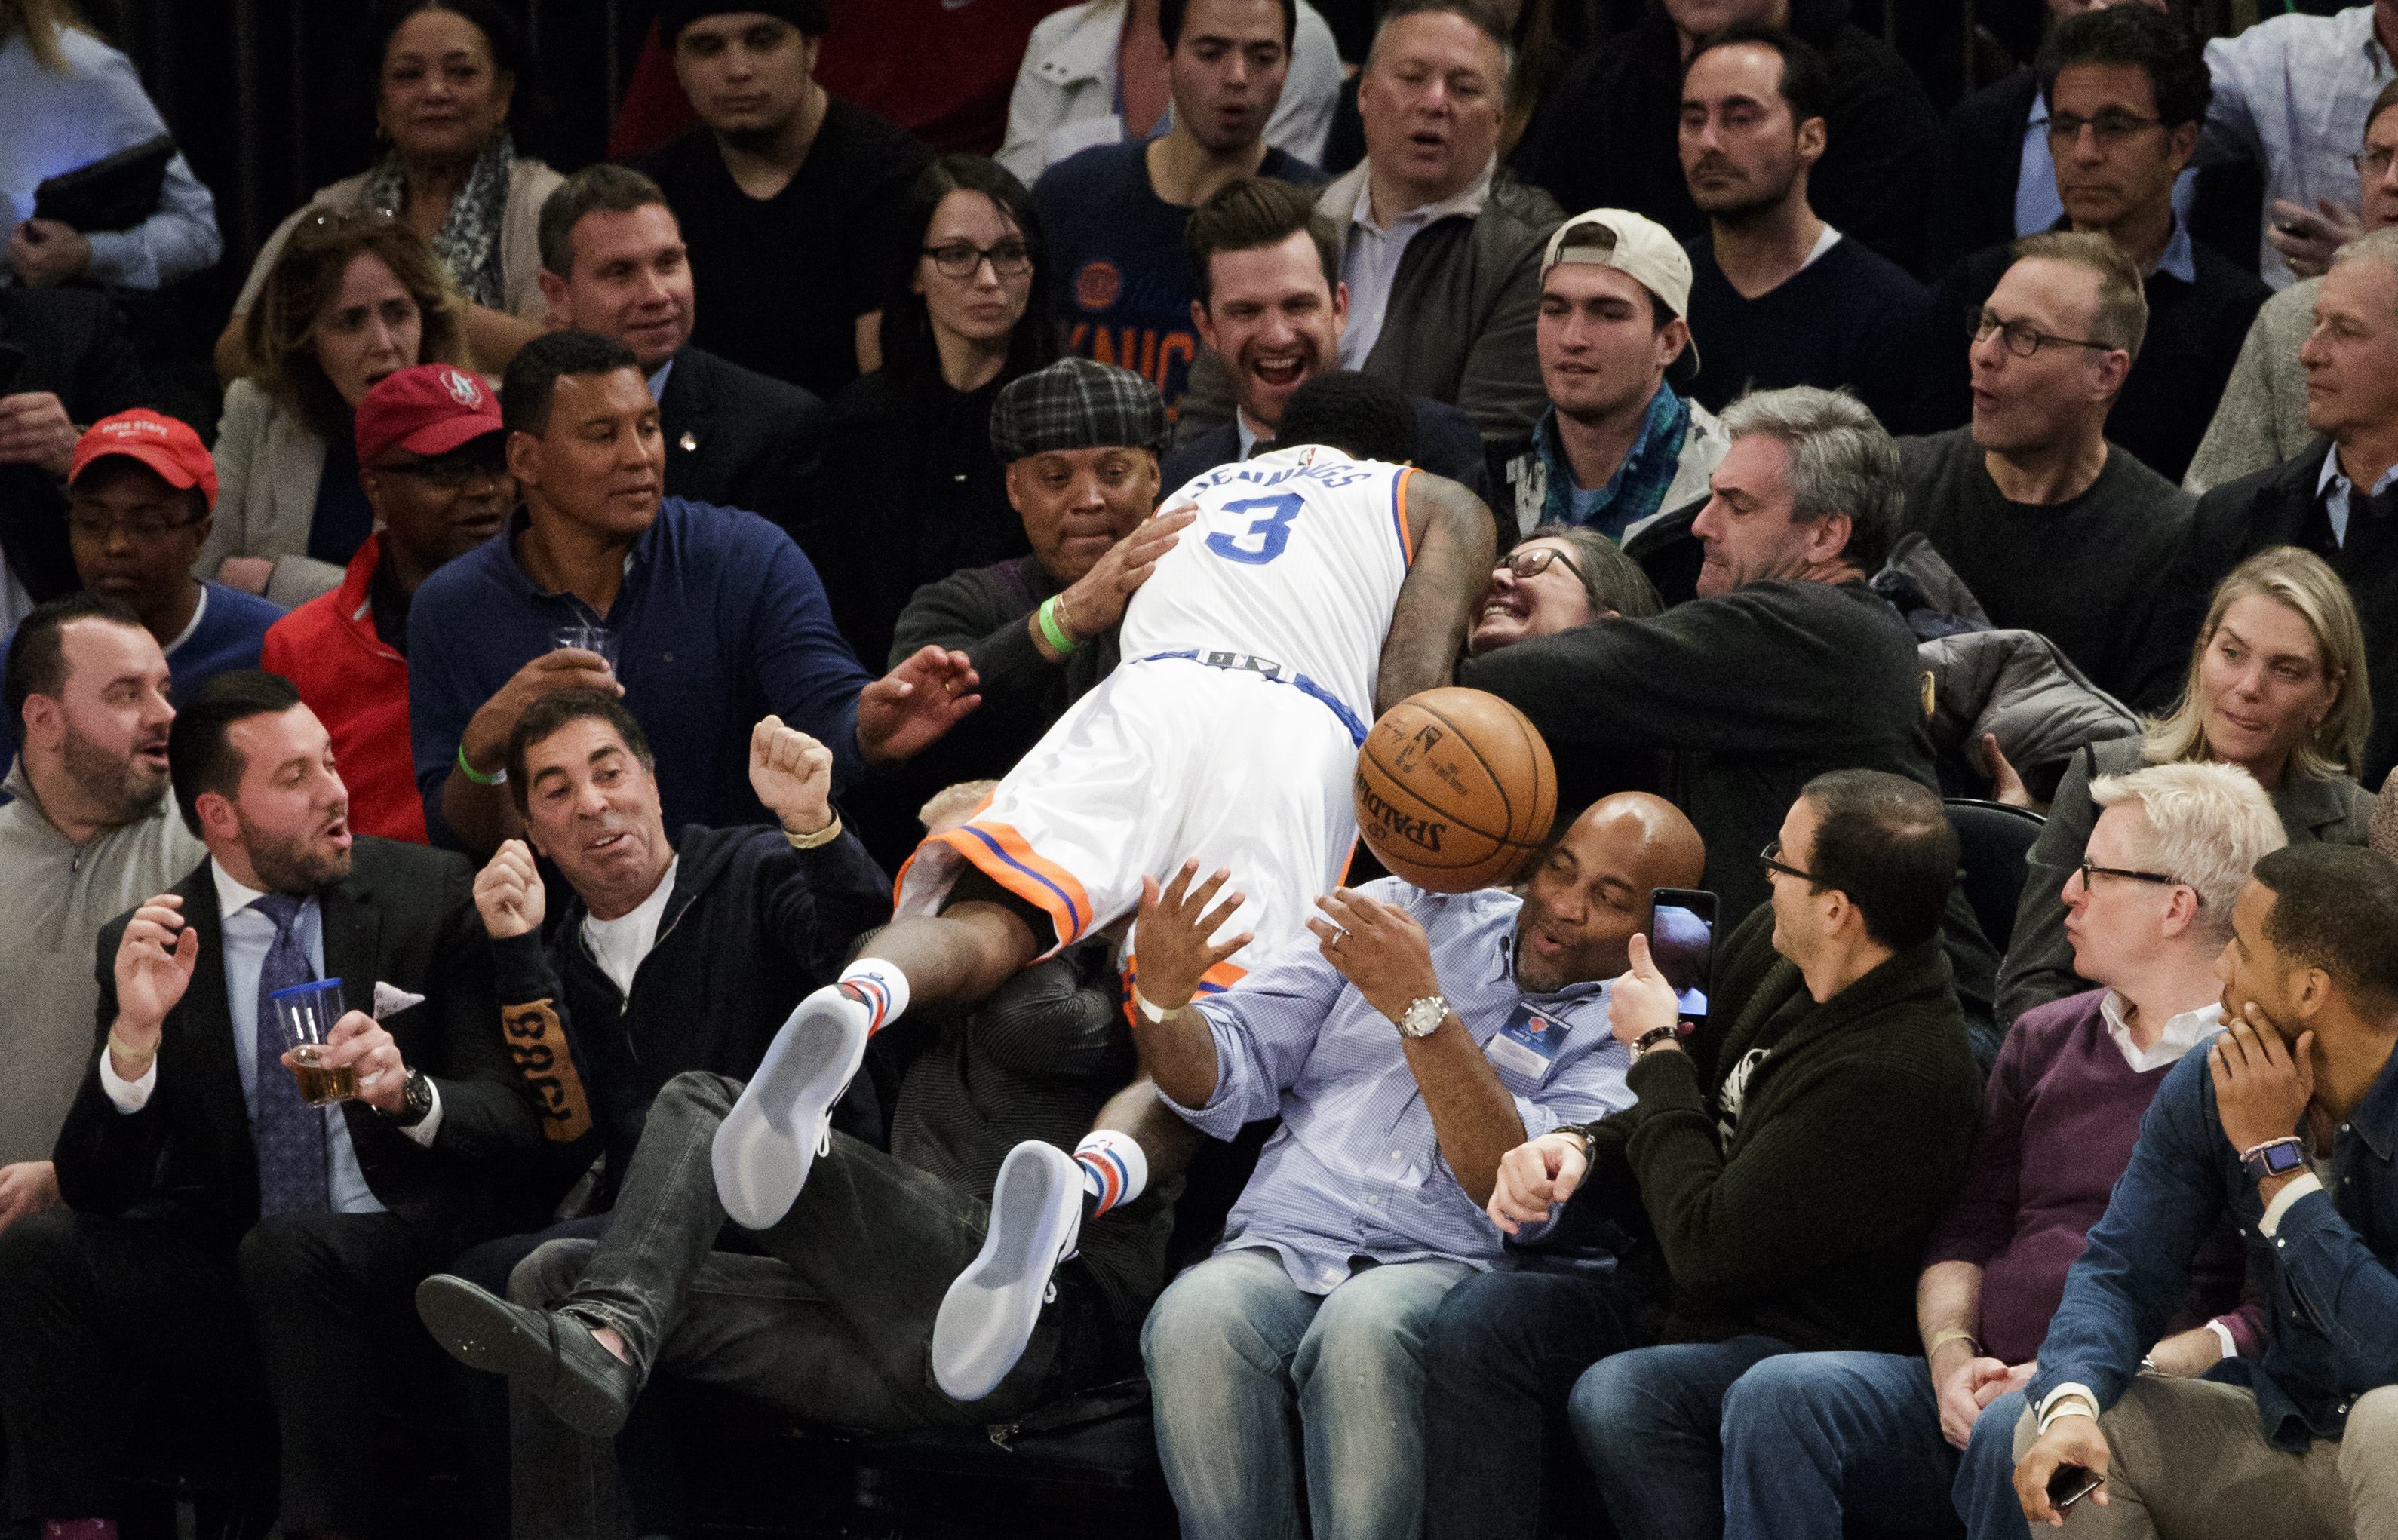 2016-12-07 22:07:52 epa05664956 New York Knick guard Brandon Jennings (C) dives into the crowd for a loose ball during the first half of the NBA basketball game between the Cleveland Cavaliers and the New York Knicks at Madison Square Garden in New York, New York, USA, 07 December 2016. EPA/JUSTIN LANE